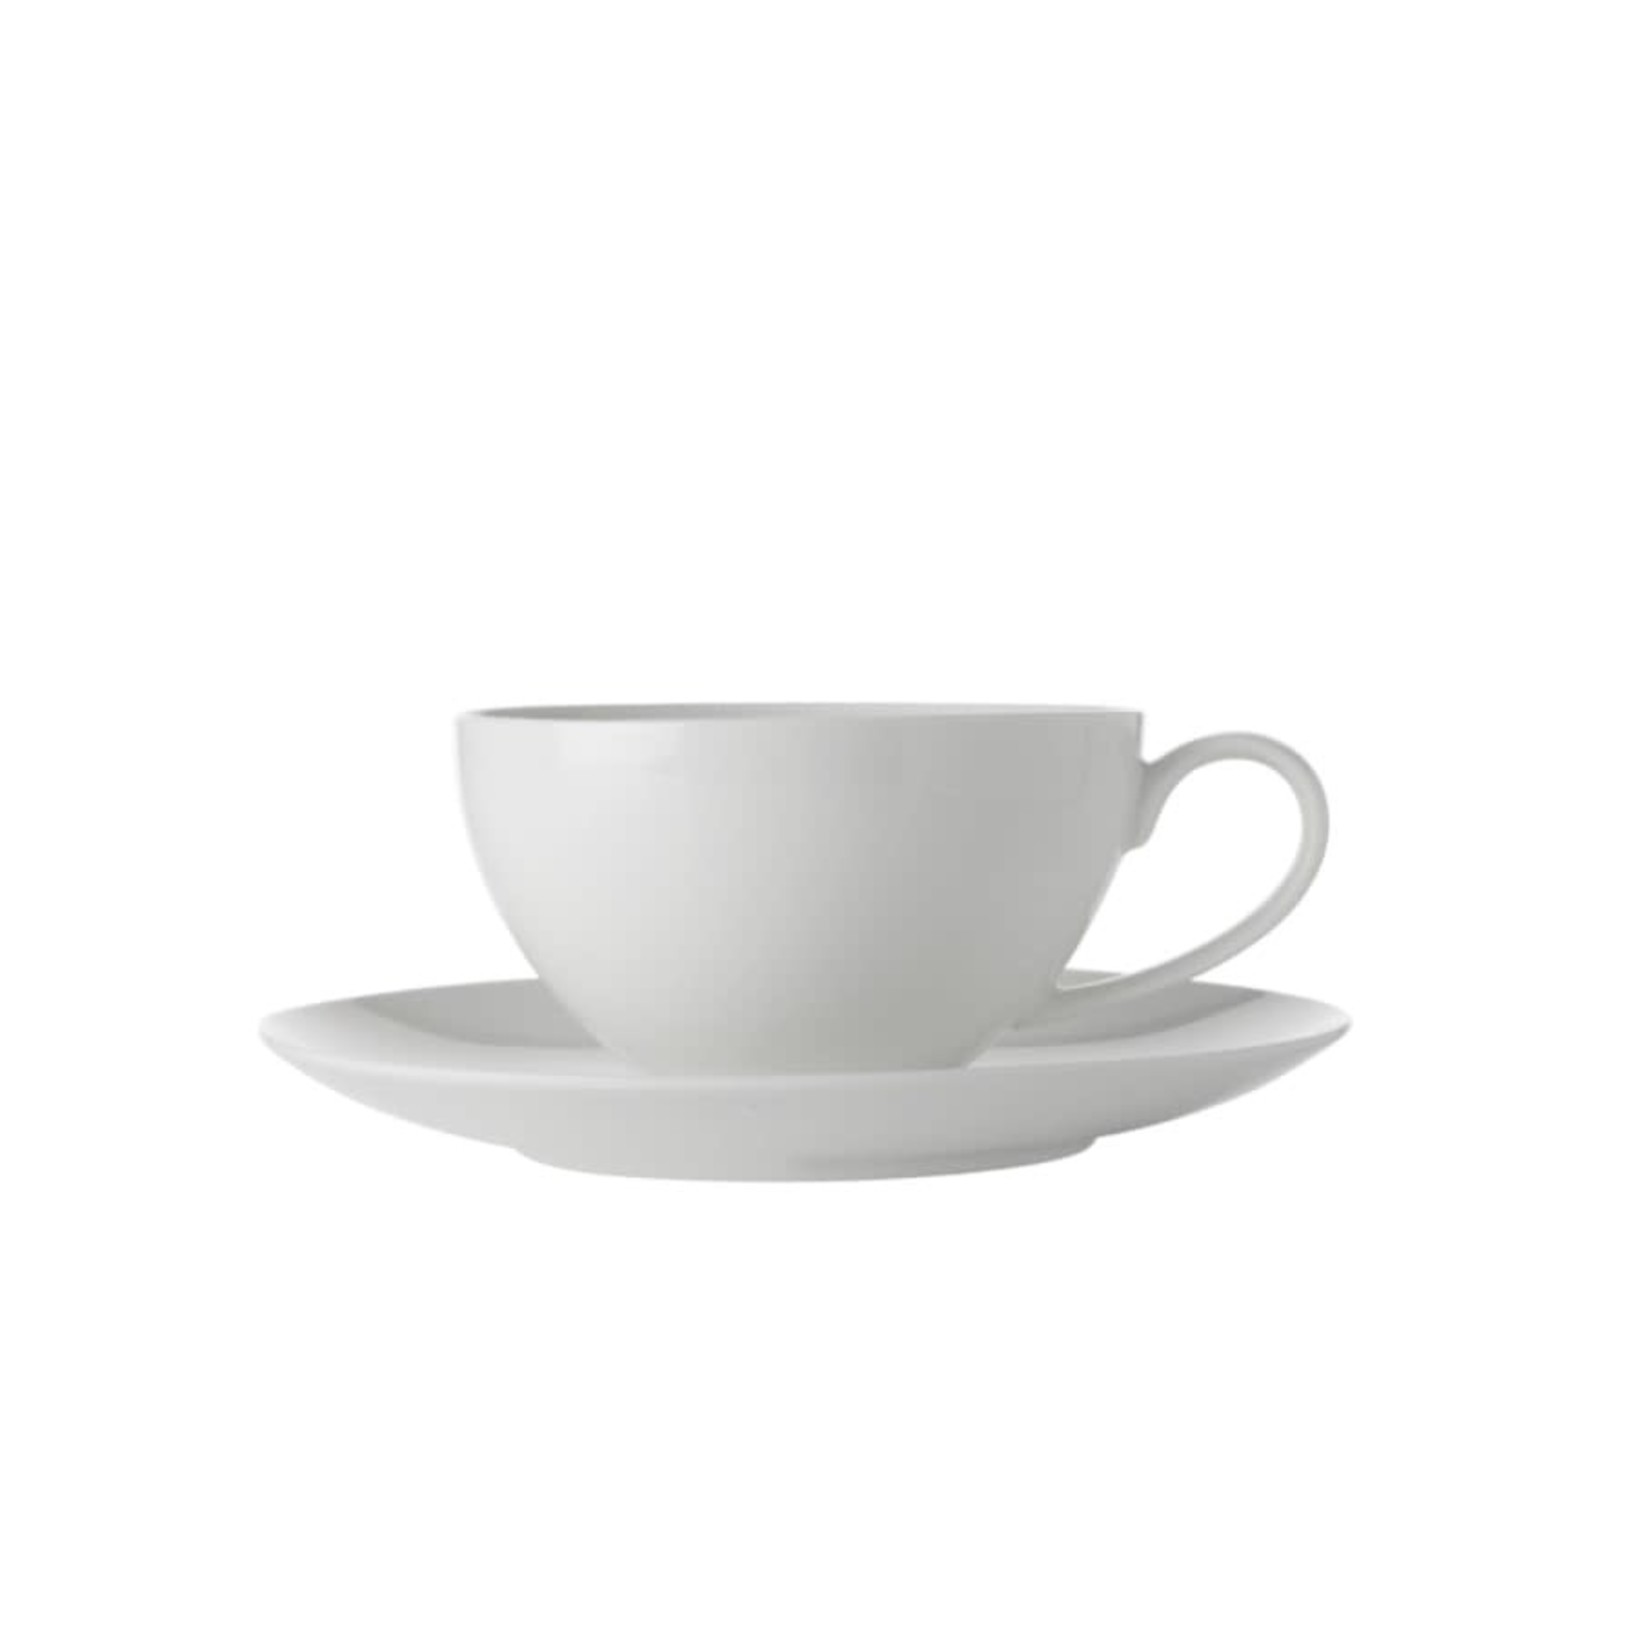 MAXWELL WILLIAMS MAXWELL WILLIAMS Basic Cappuccino Cup & Saucer 400ml